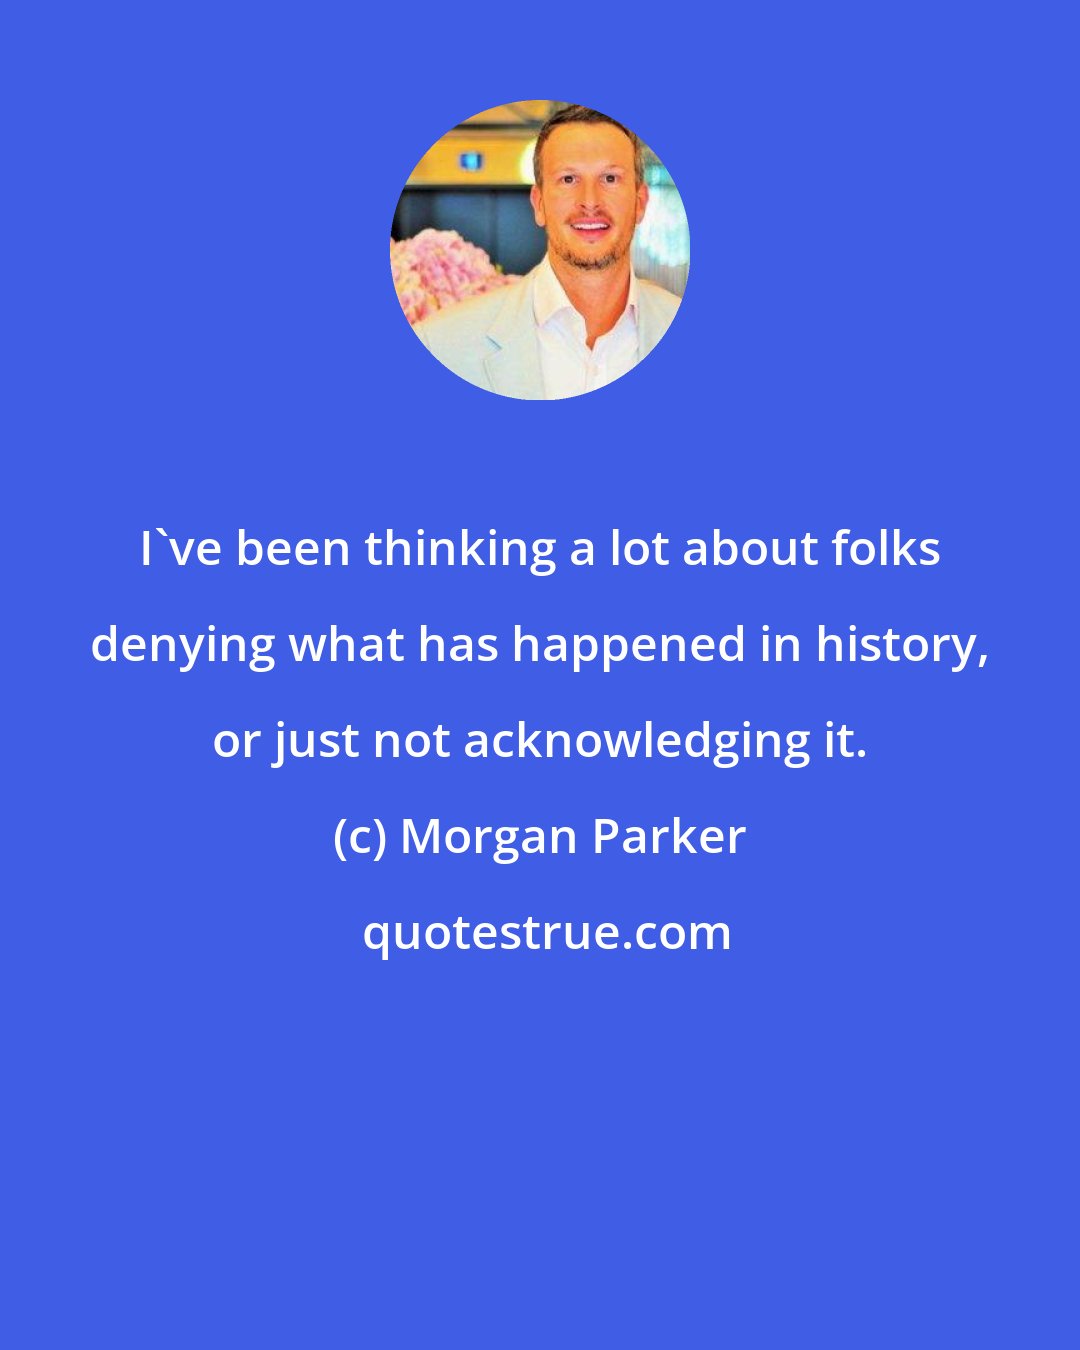 Morgan Parker: I've been thinking a lot about folks denying what has happened in history, or just not acknowledging it.